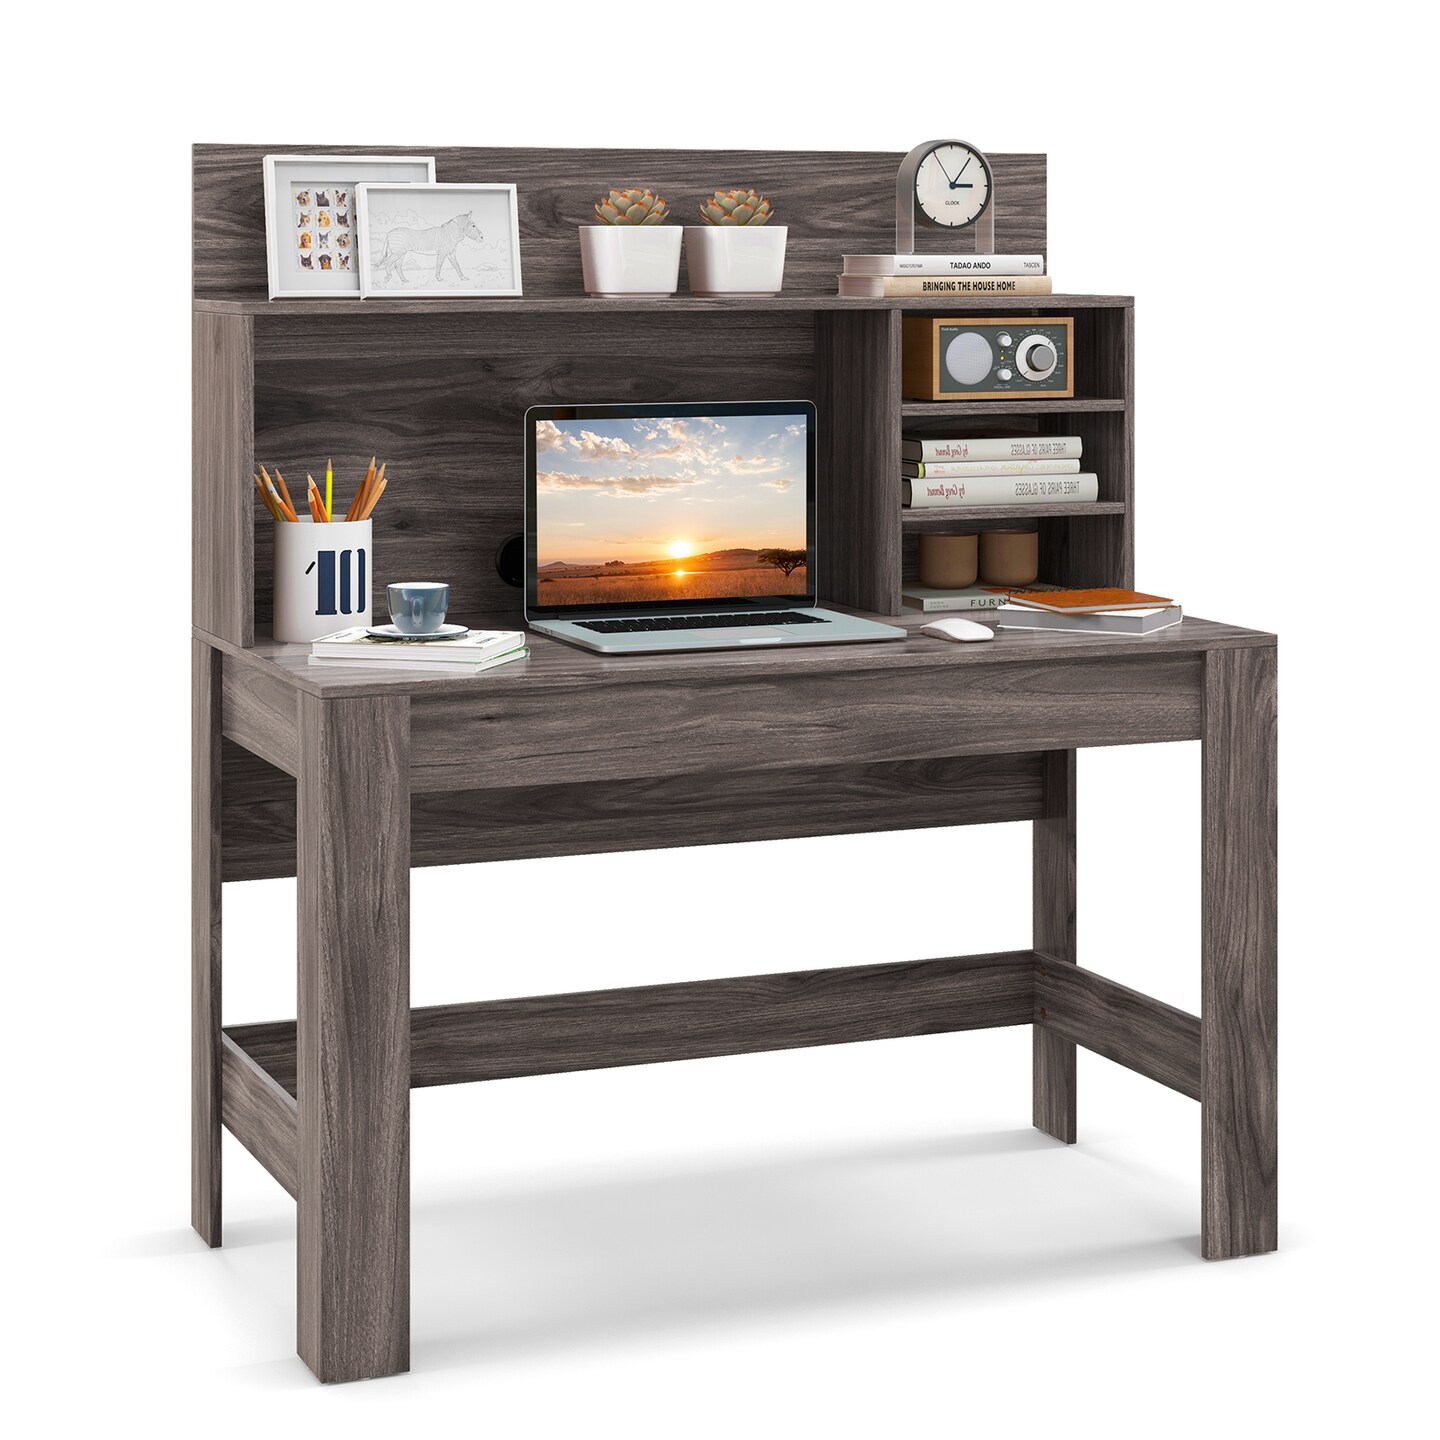 Small Space Writing Desk